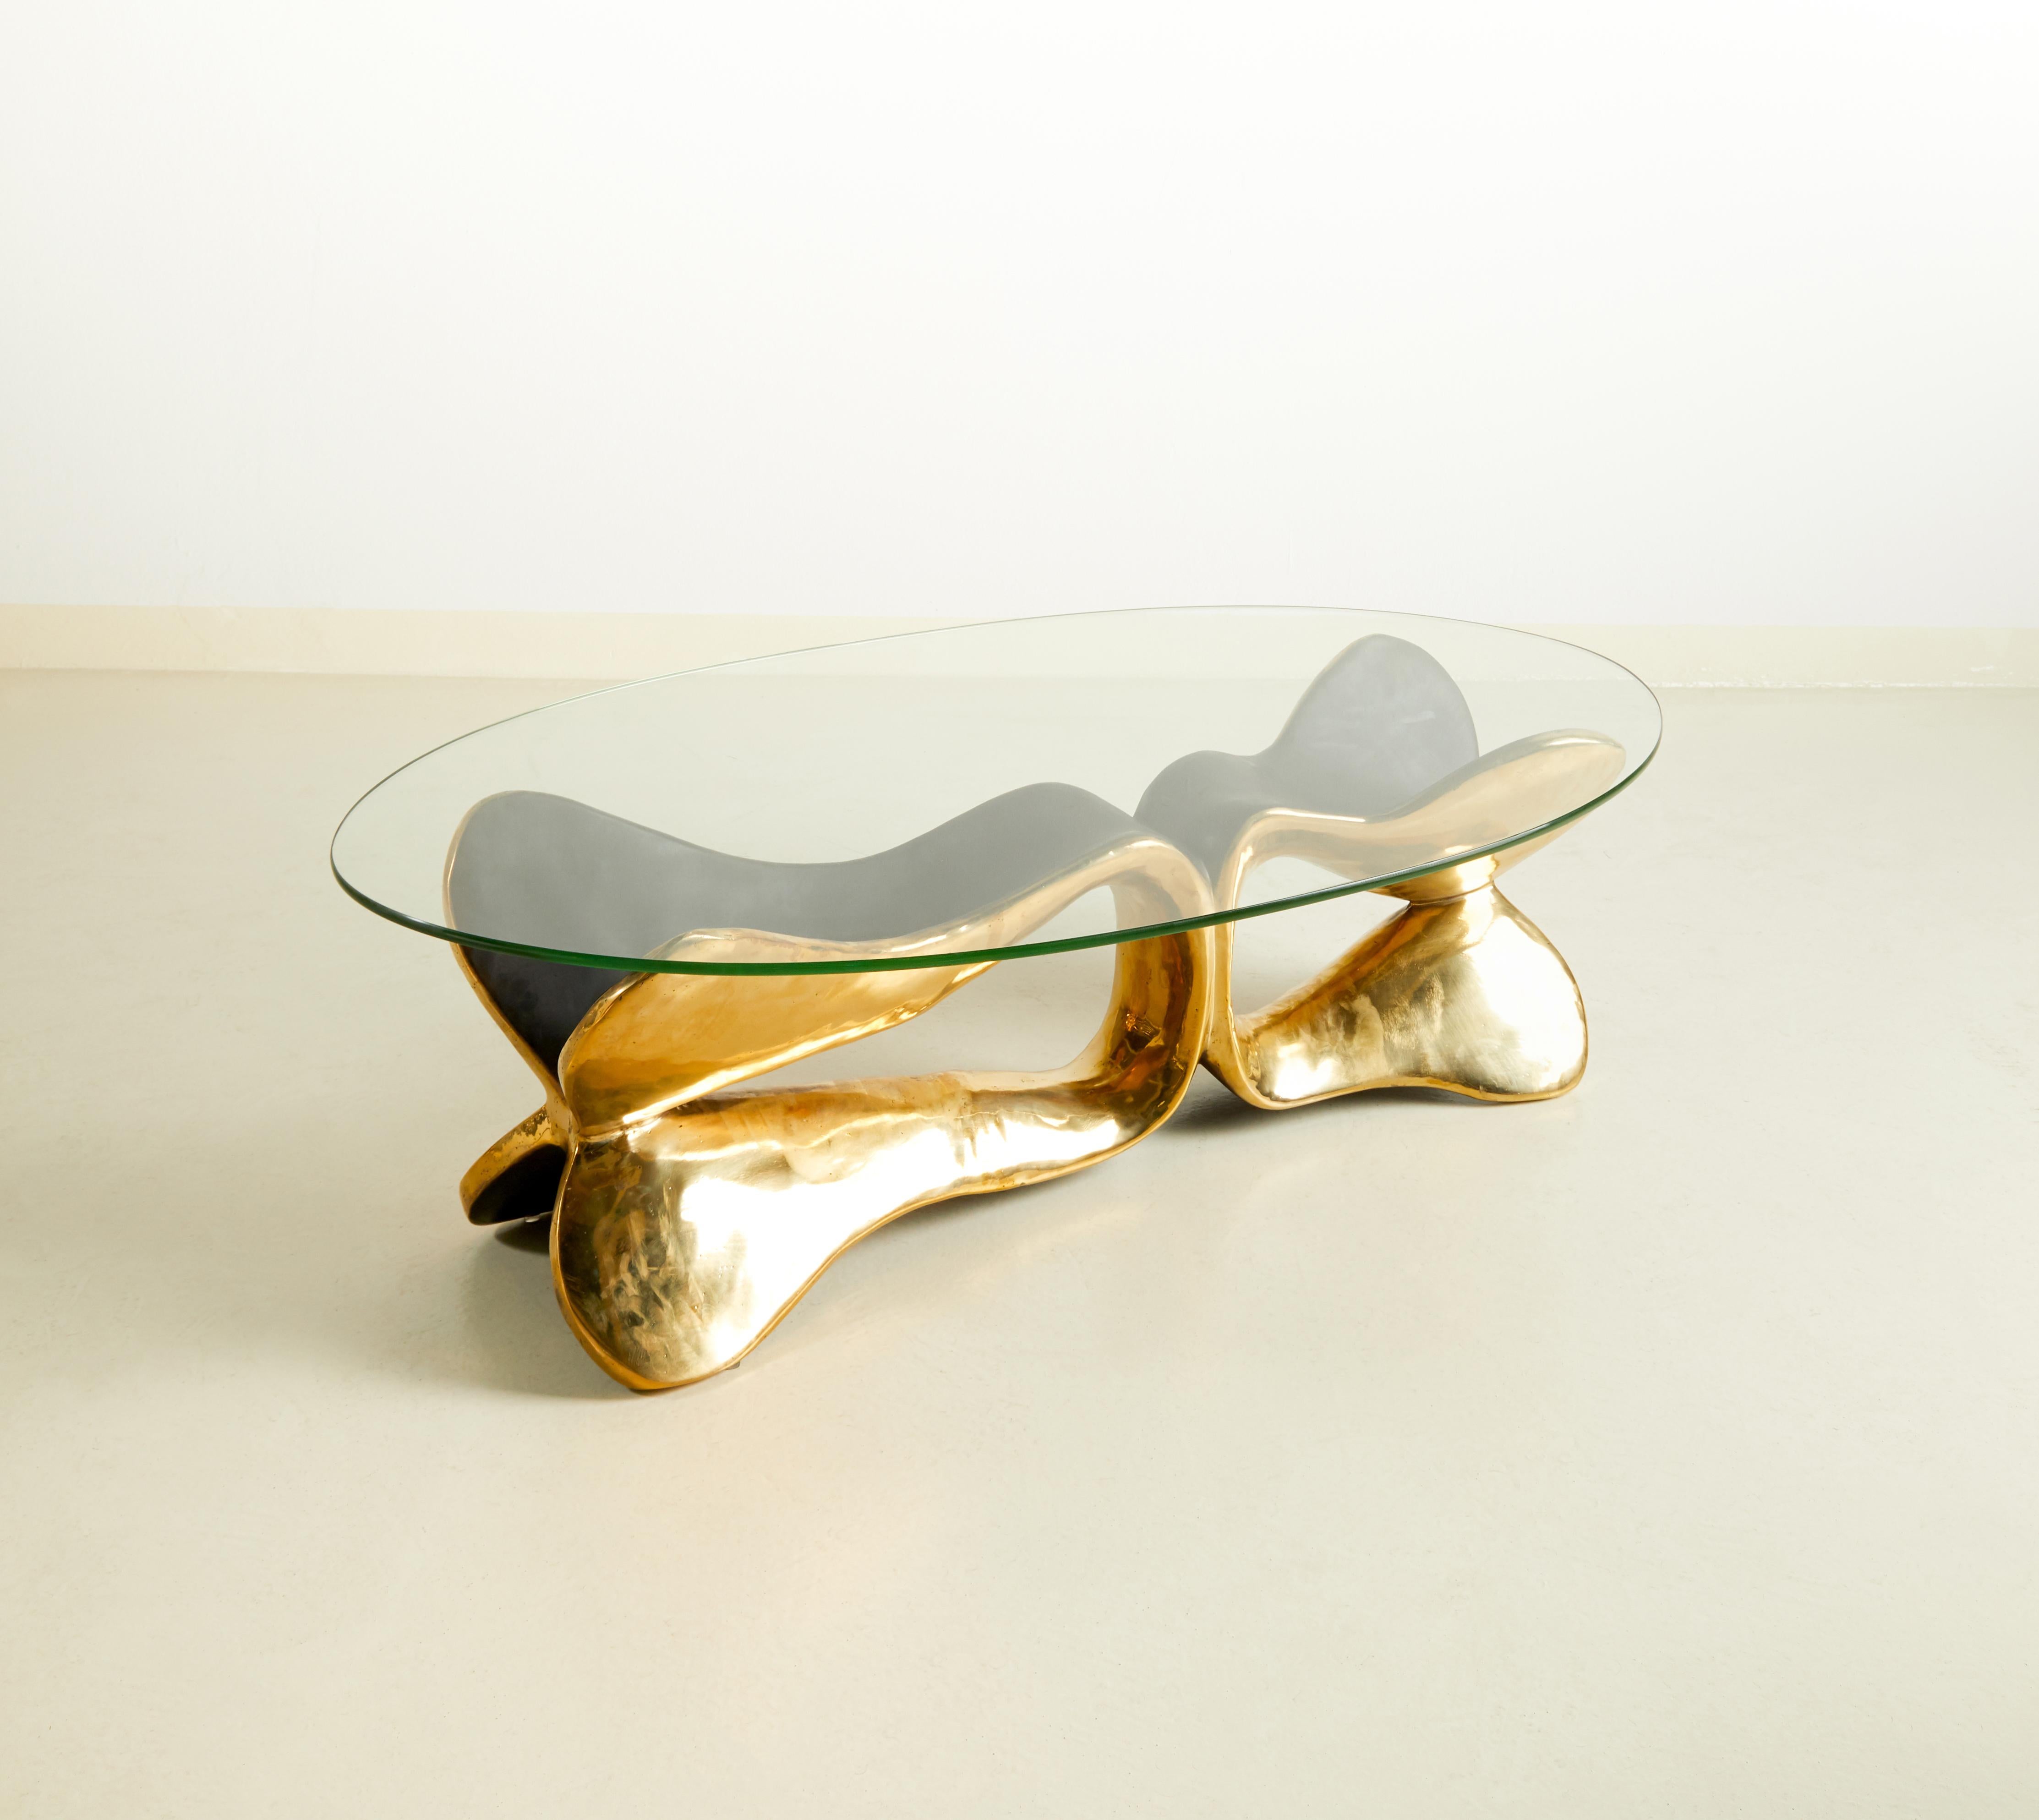 Thai Brass Sculpted Console Table, Homage to Cesar's Compression, Misaya